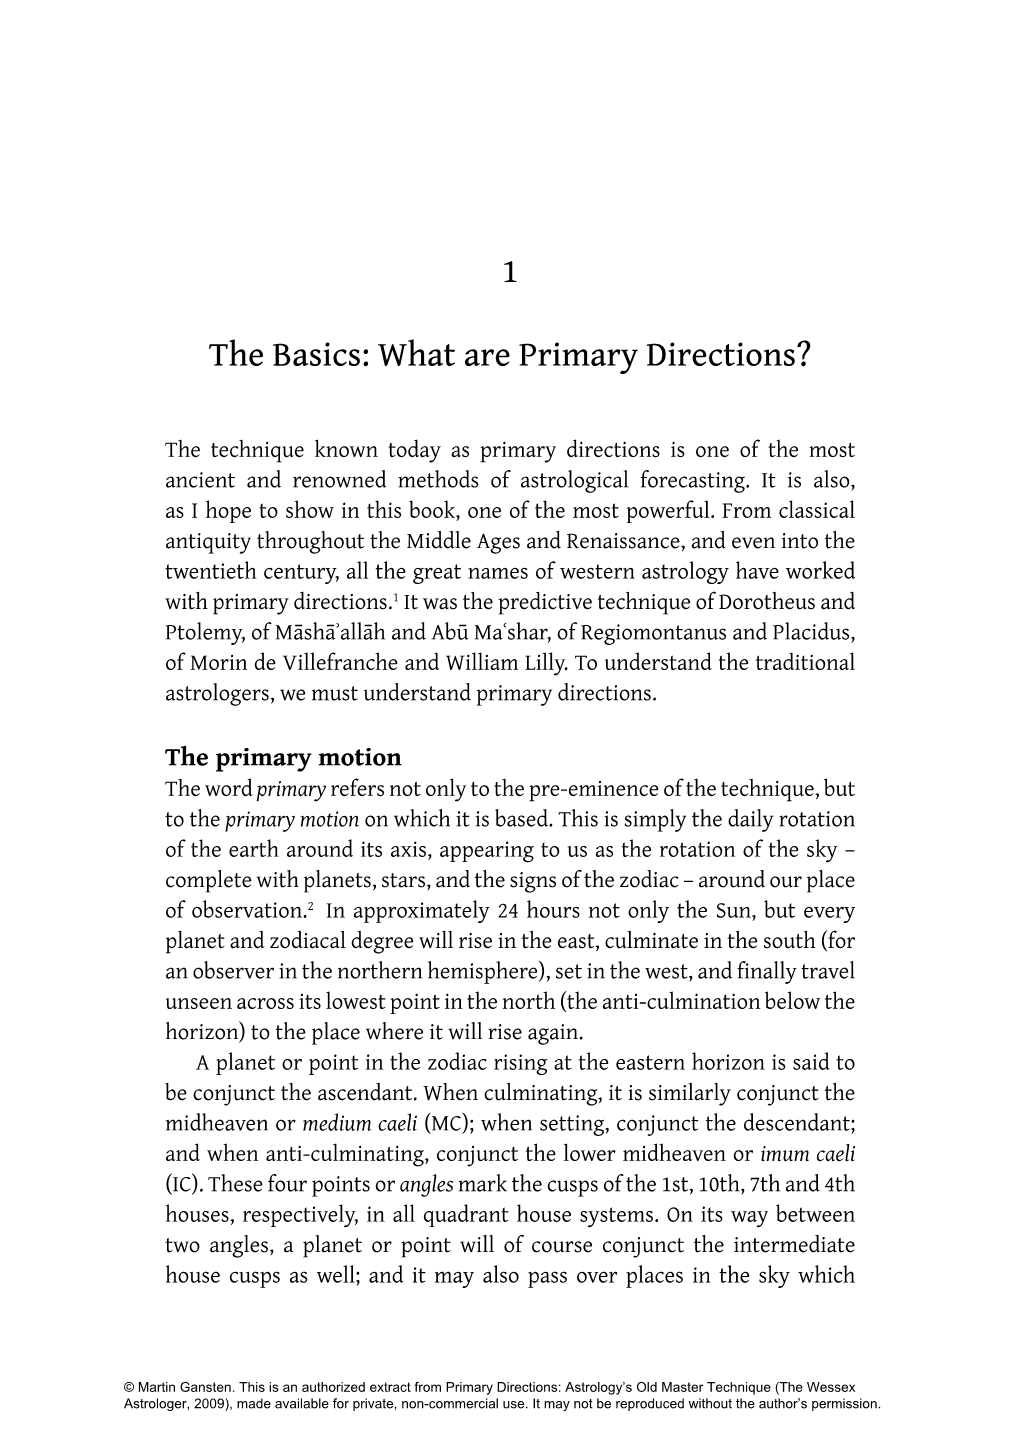 What Are Primary Directions? 1